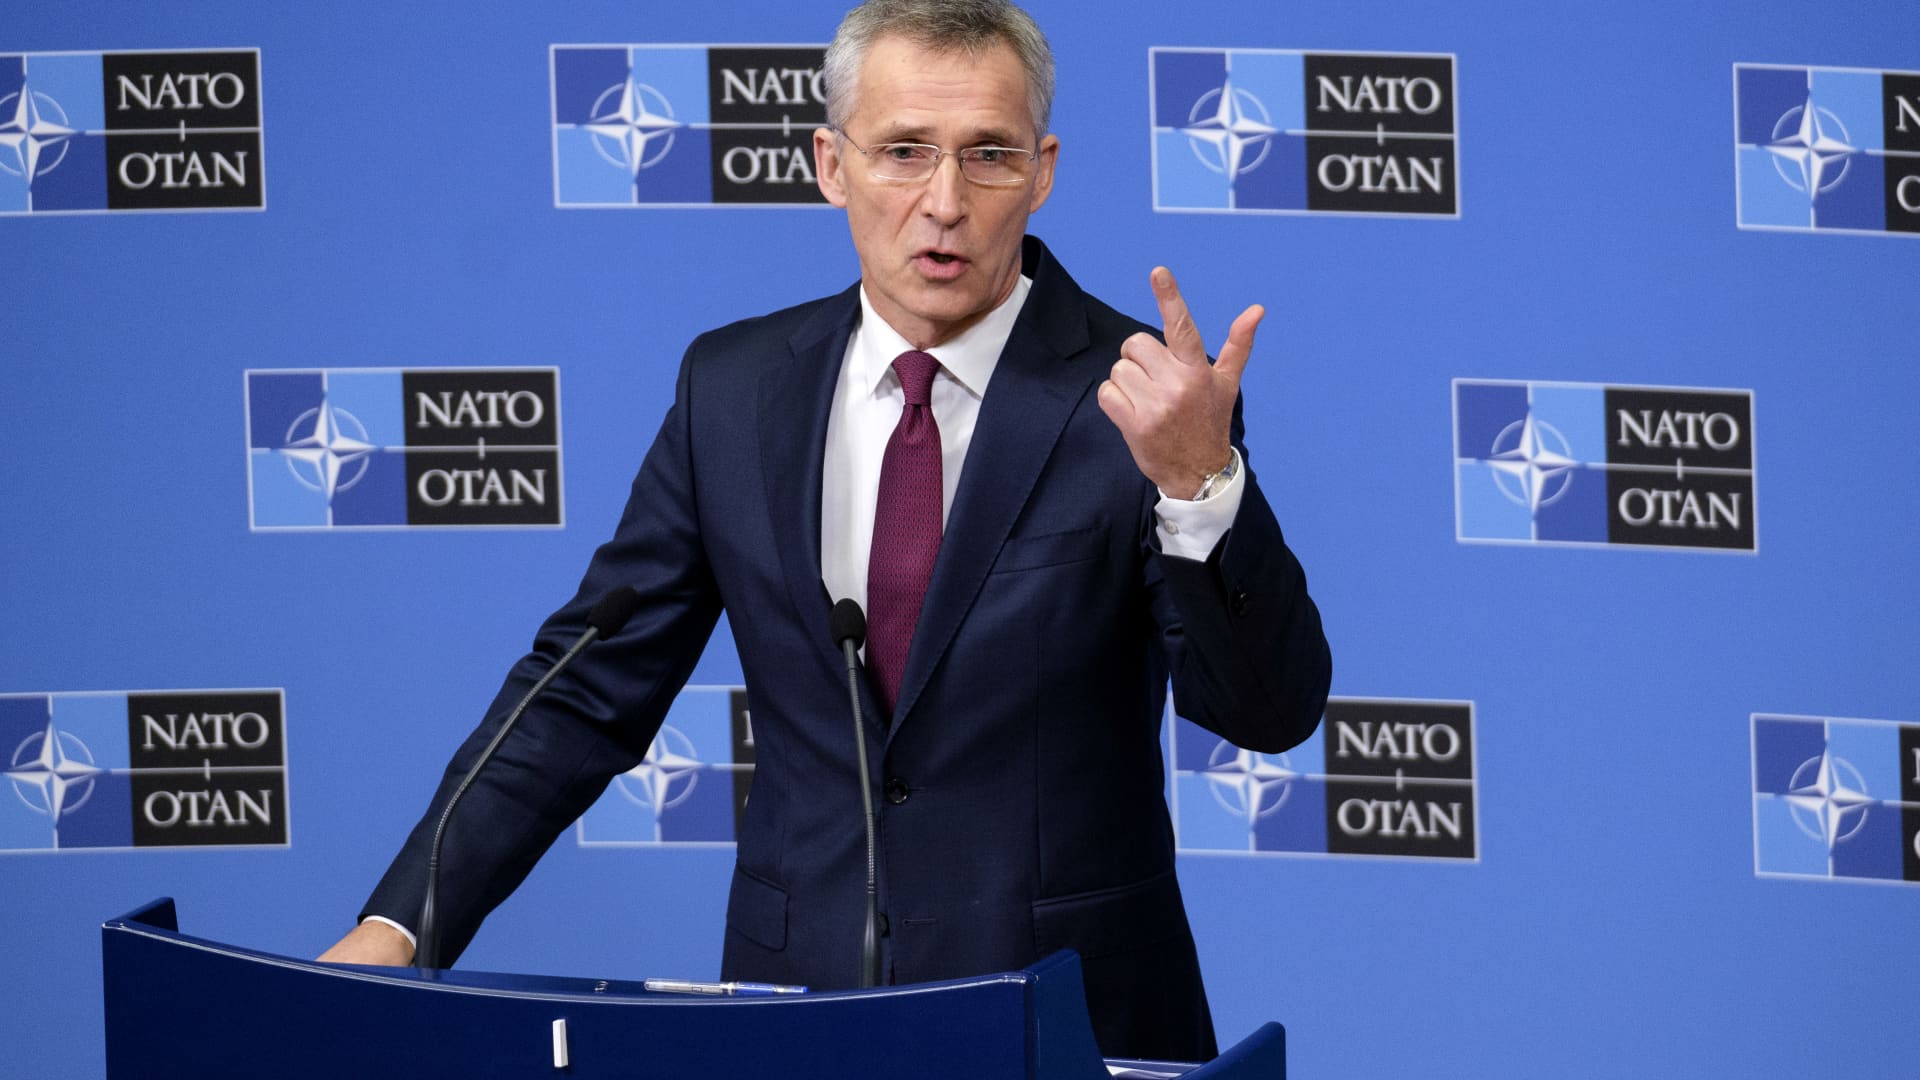 Jens Stoltenberg, 13th Secretary General of the North Atlantic Treaty Organization, is talks to the media at the NATO headquarter on February 11, 2020 in Brussels, Belgium.